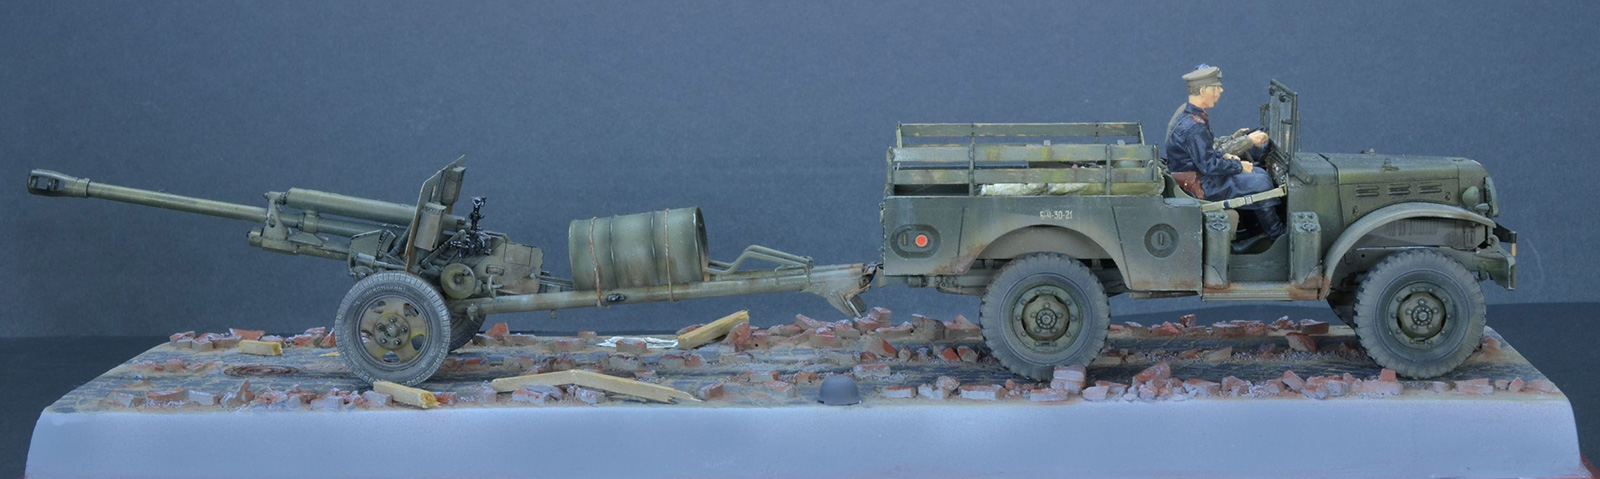 Dioramas and Vignettes: Dodge WC-51 and ZiS-3, photo #2